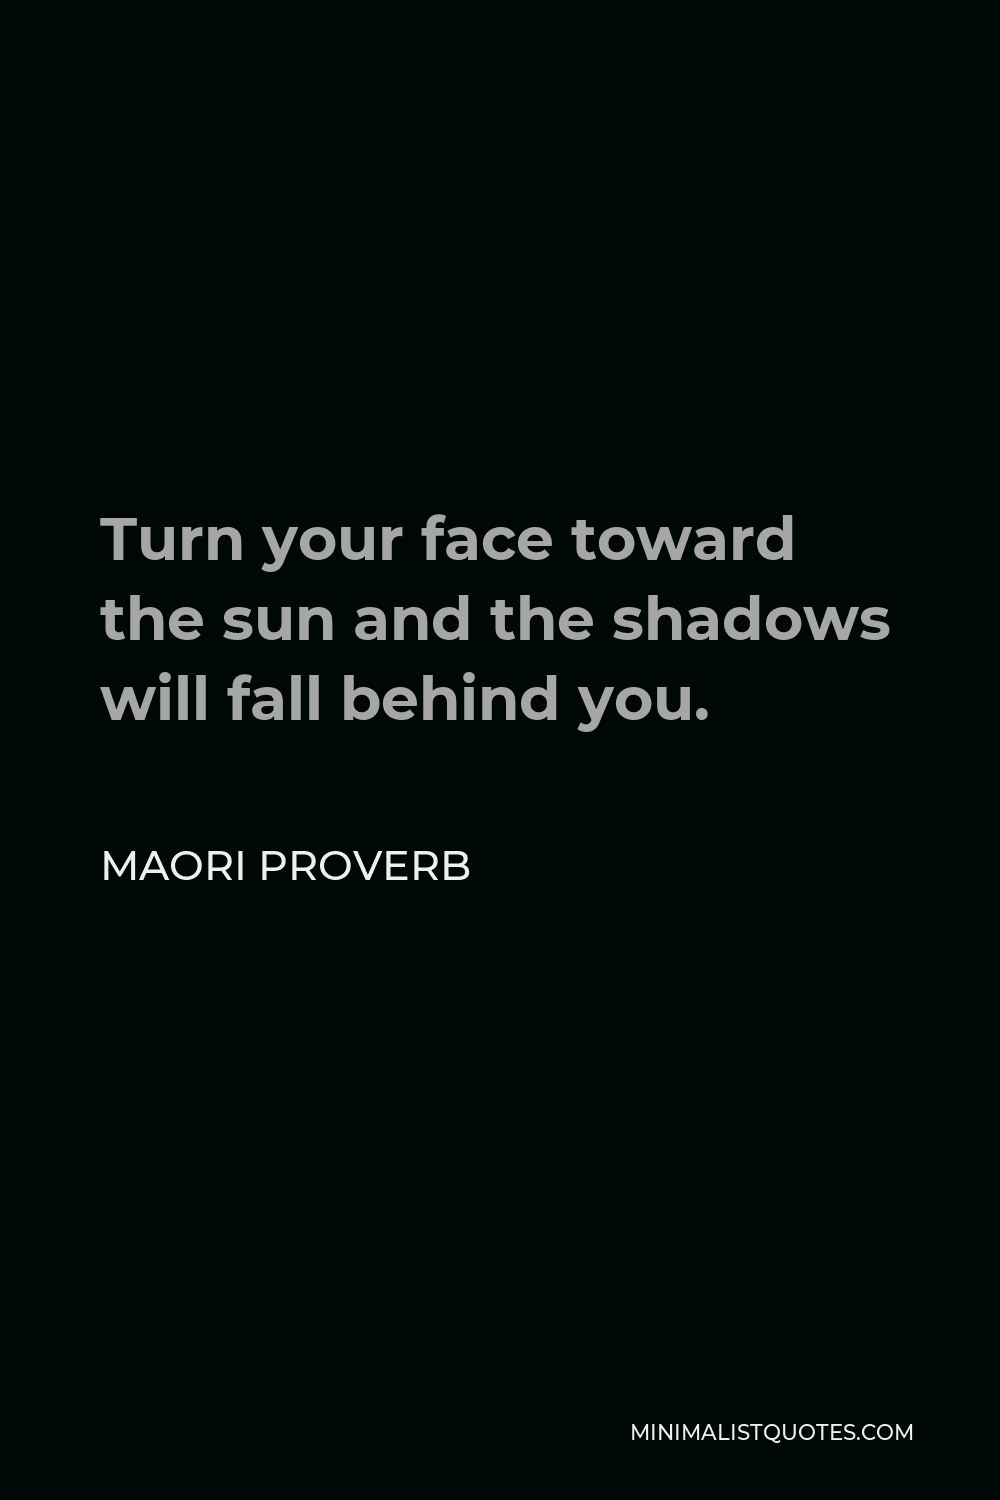 Maori Proverb Quote - Turn your face toward the sun and the shadows will fall behind you.